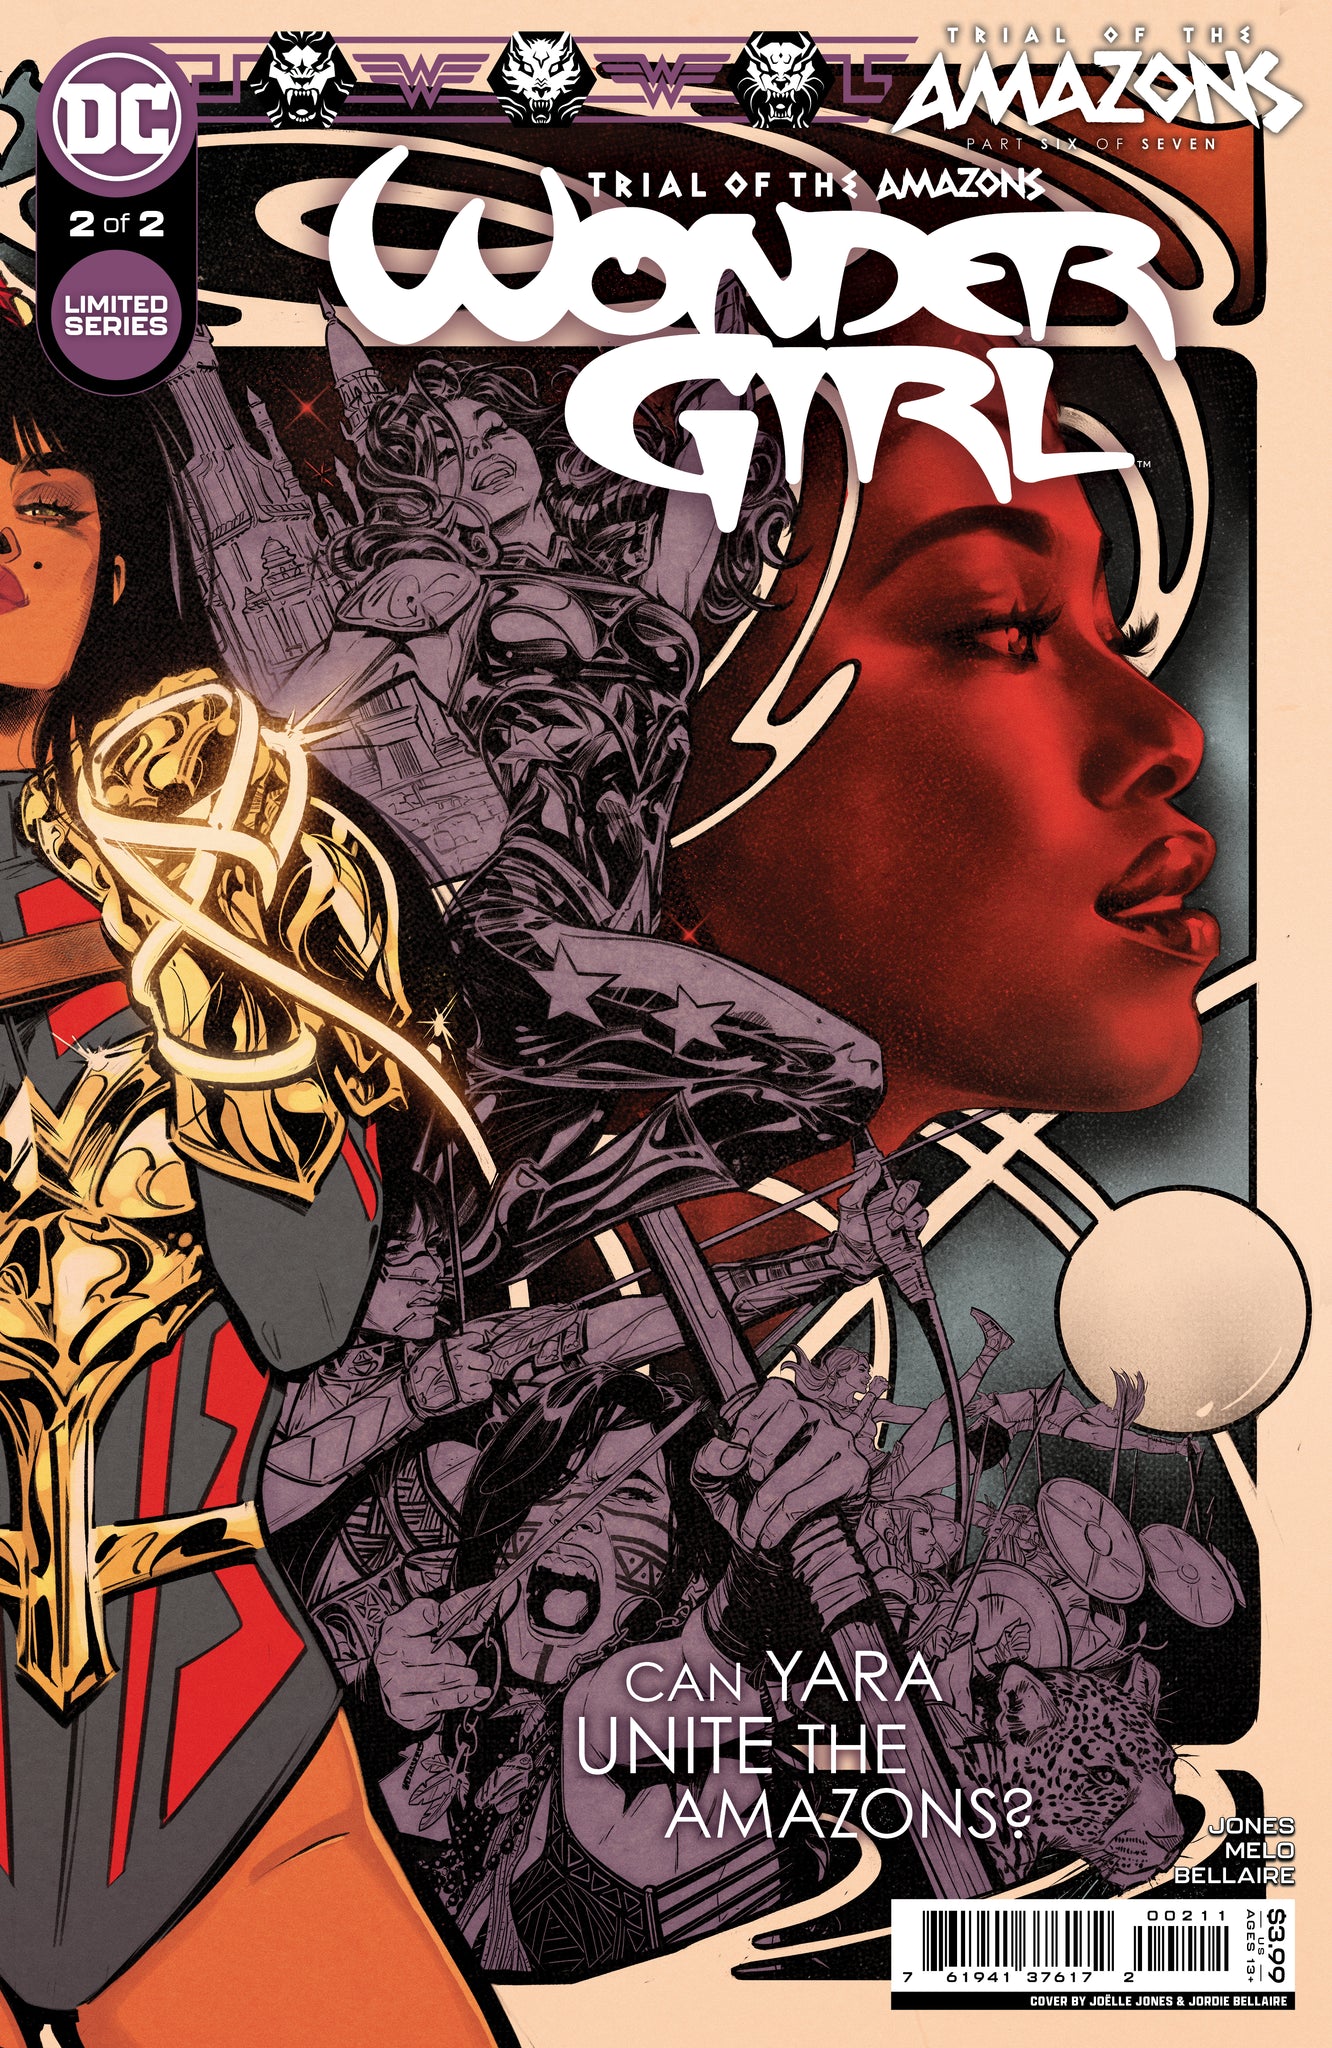 TIRAL OF THE AMAZONS WONDER GIRL #2 (OF 2)